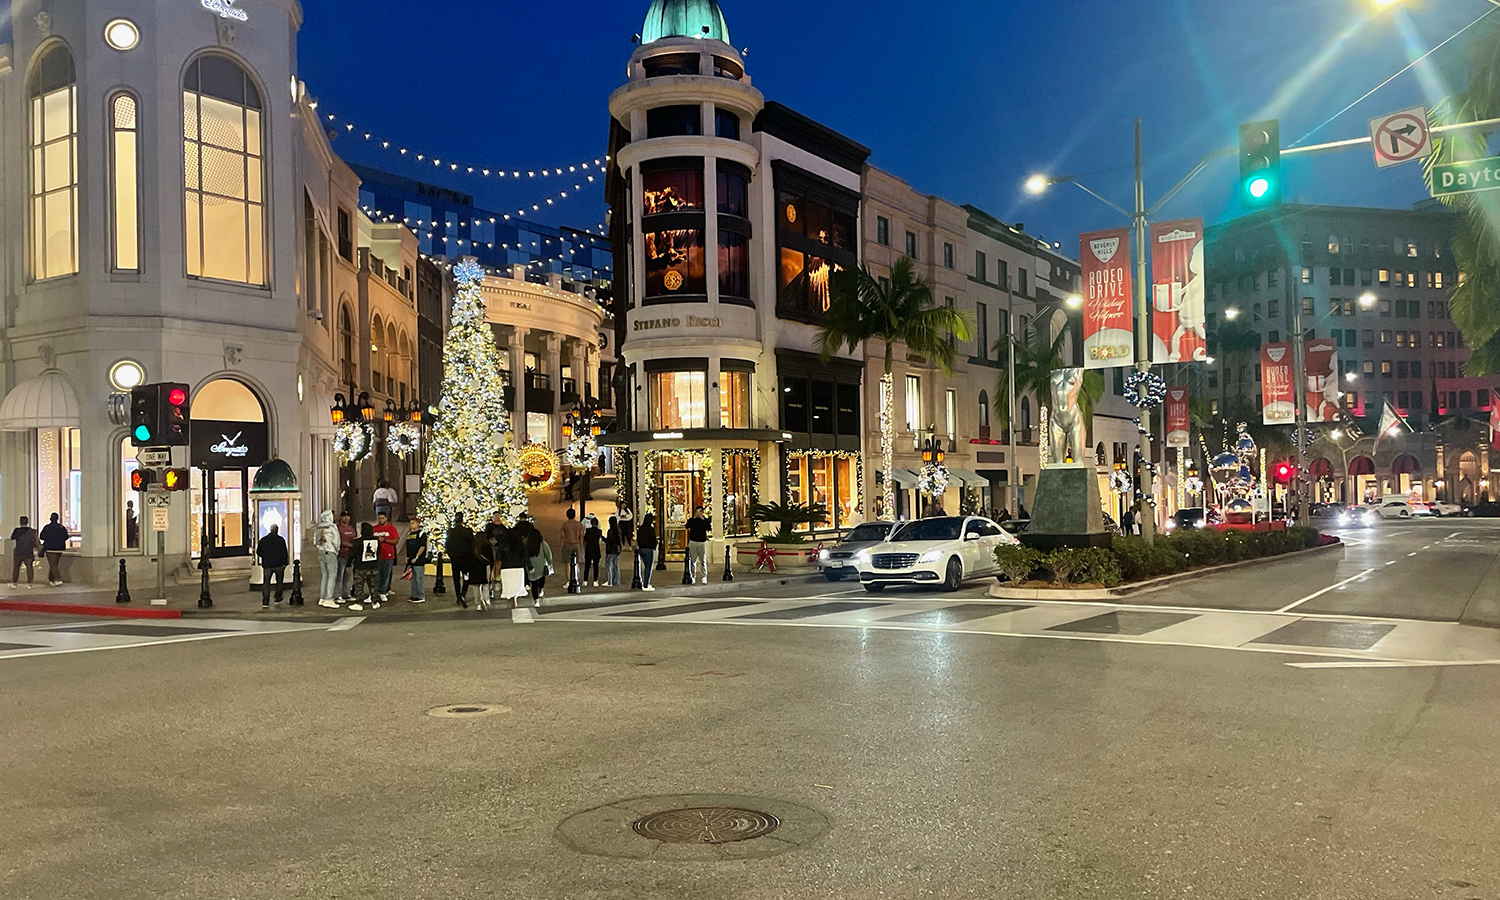 Rodeo Drive in Beverly Hills at night.